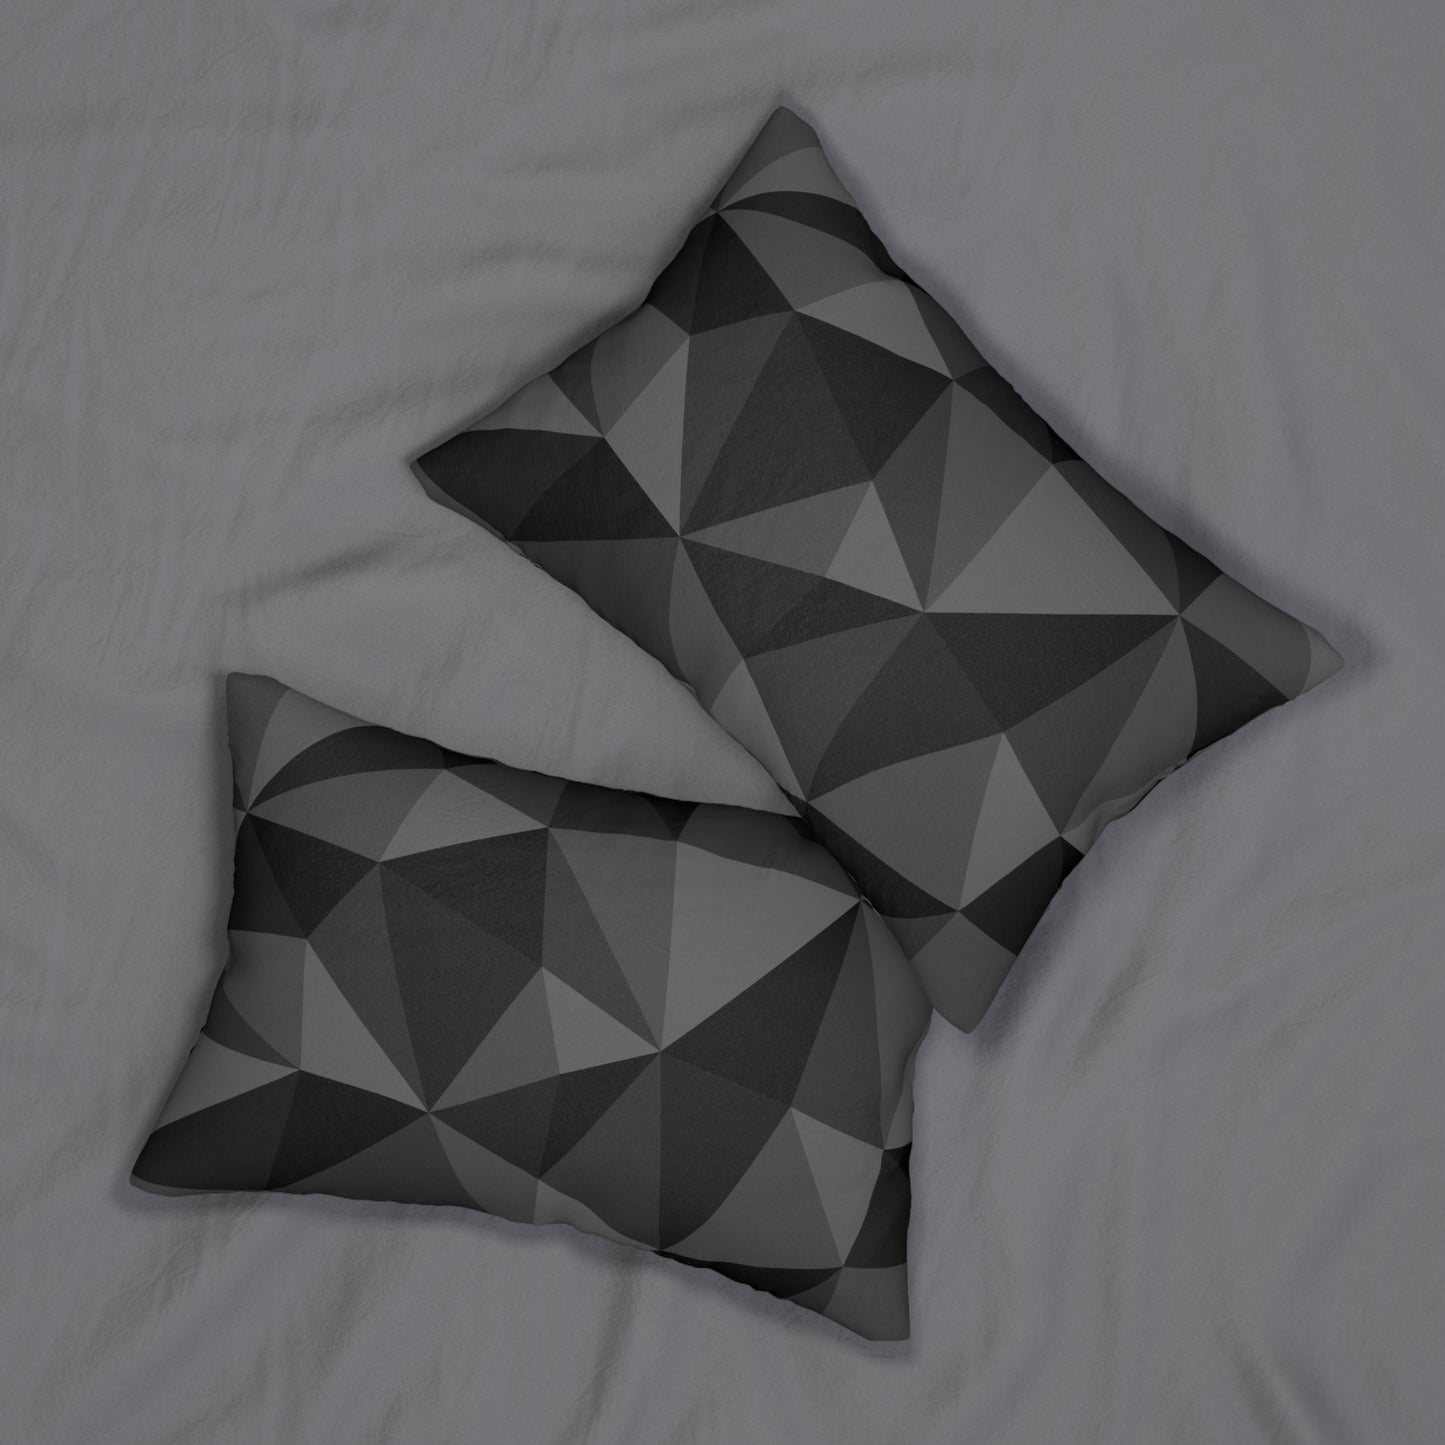 Black and Gray Abstract Pillow